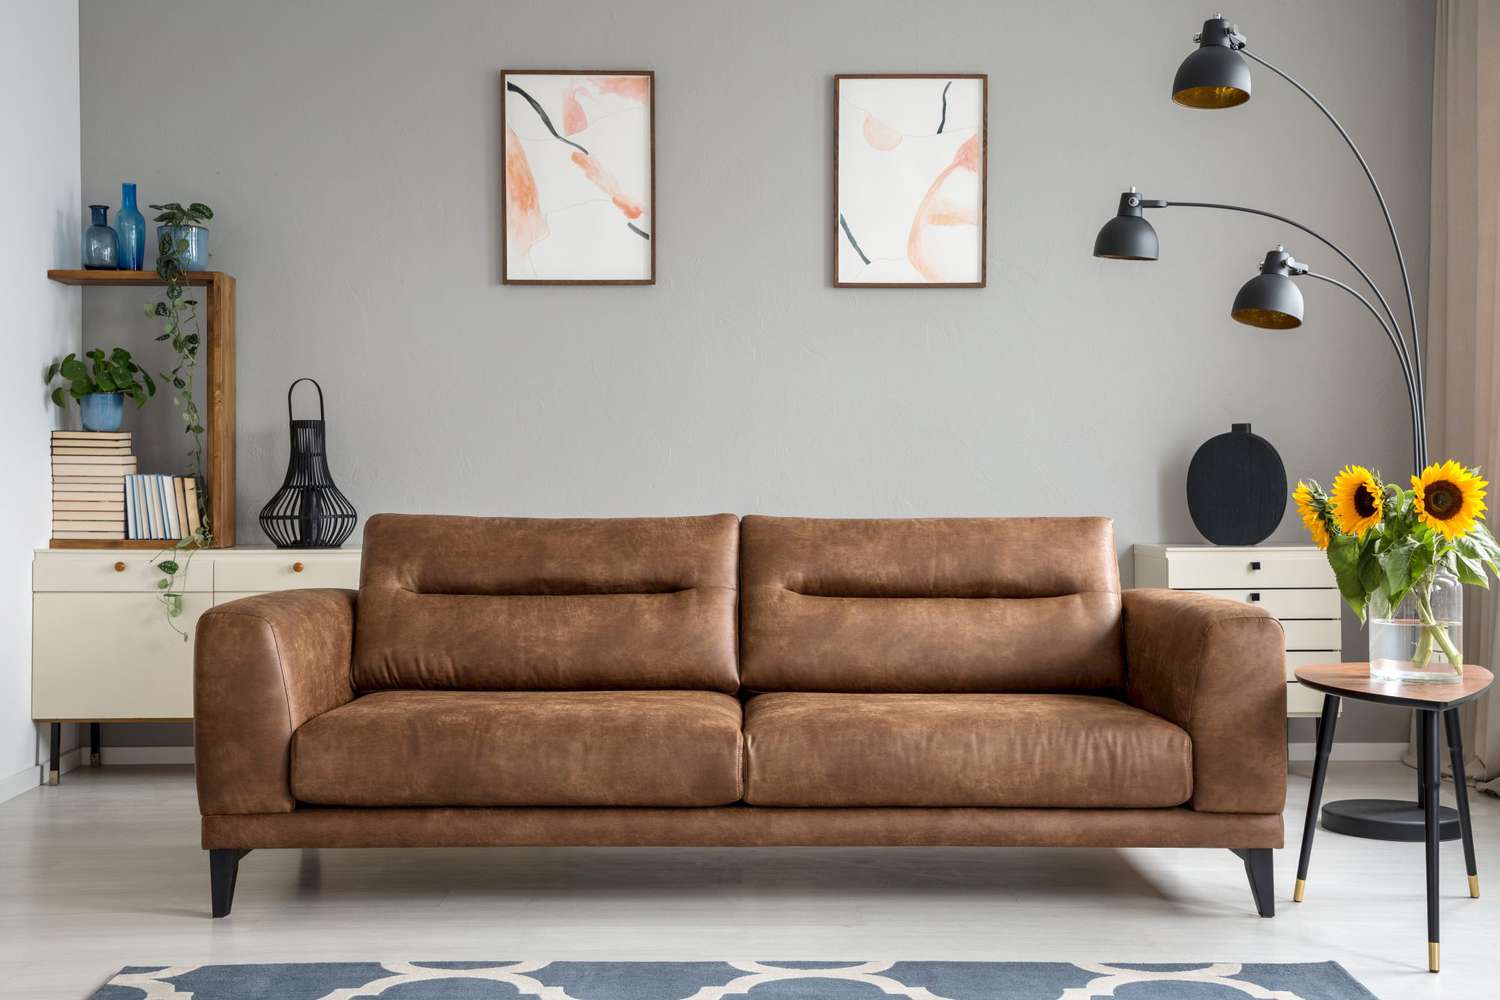 How To Get Wrinkles Out Of Leather Sofa